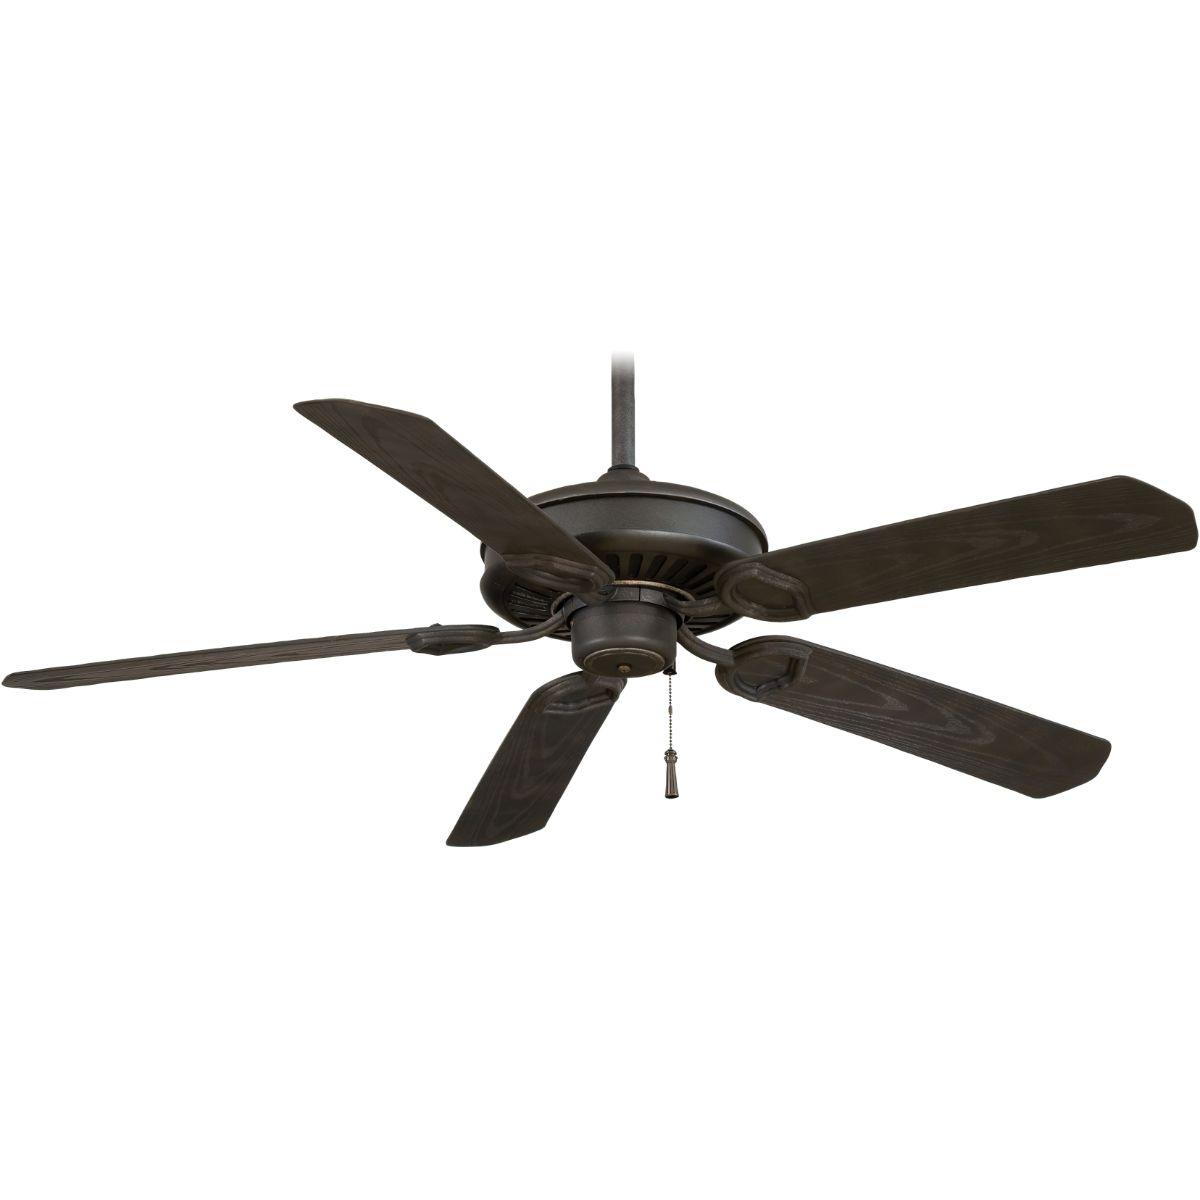 Sundowner 54 Inch Outdoor Ceiling Fan With Pull Chain